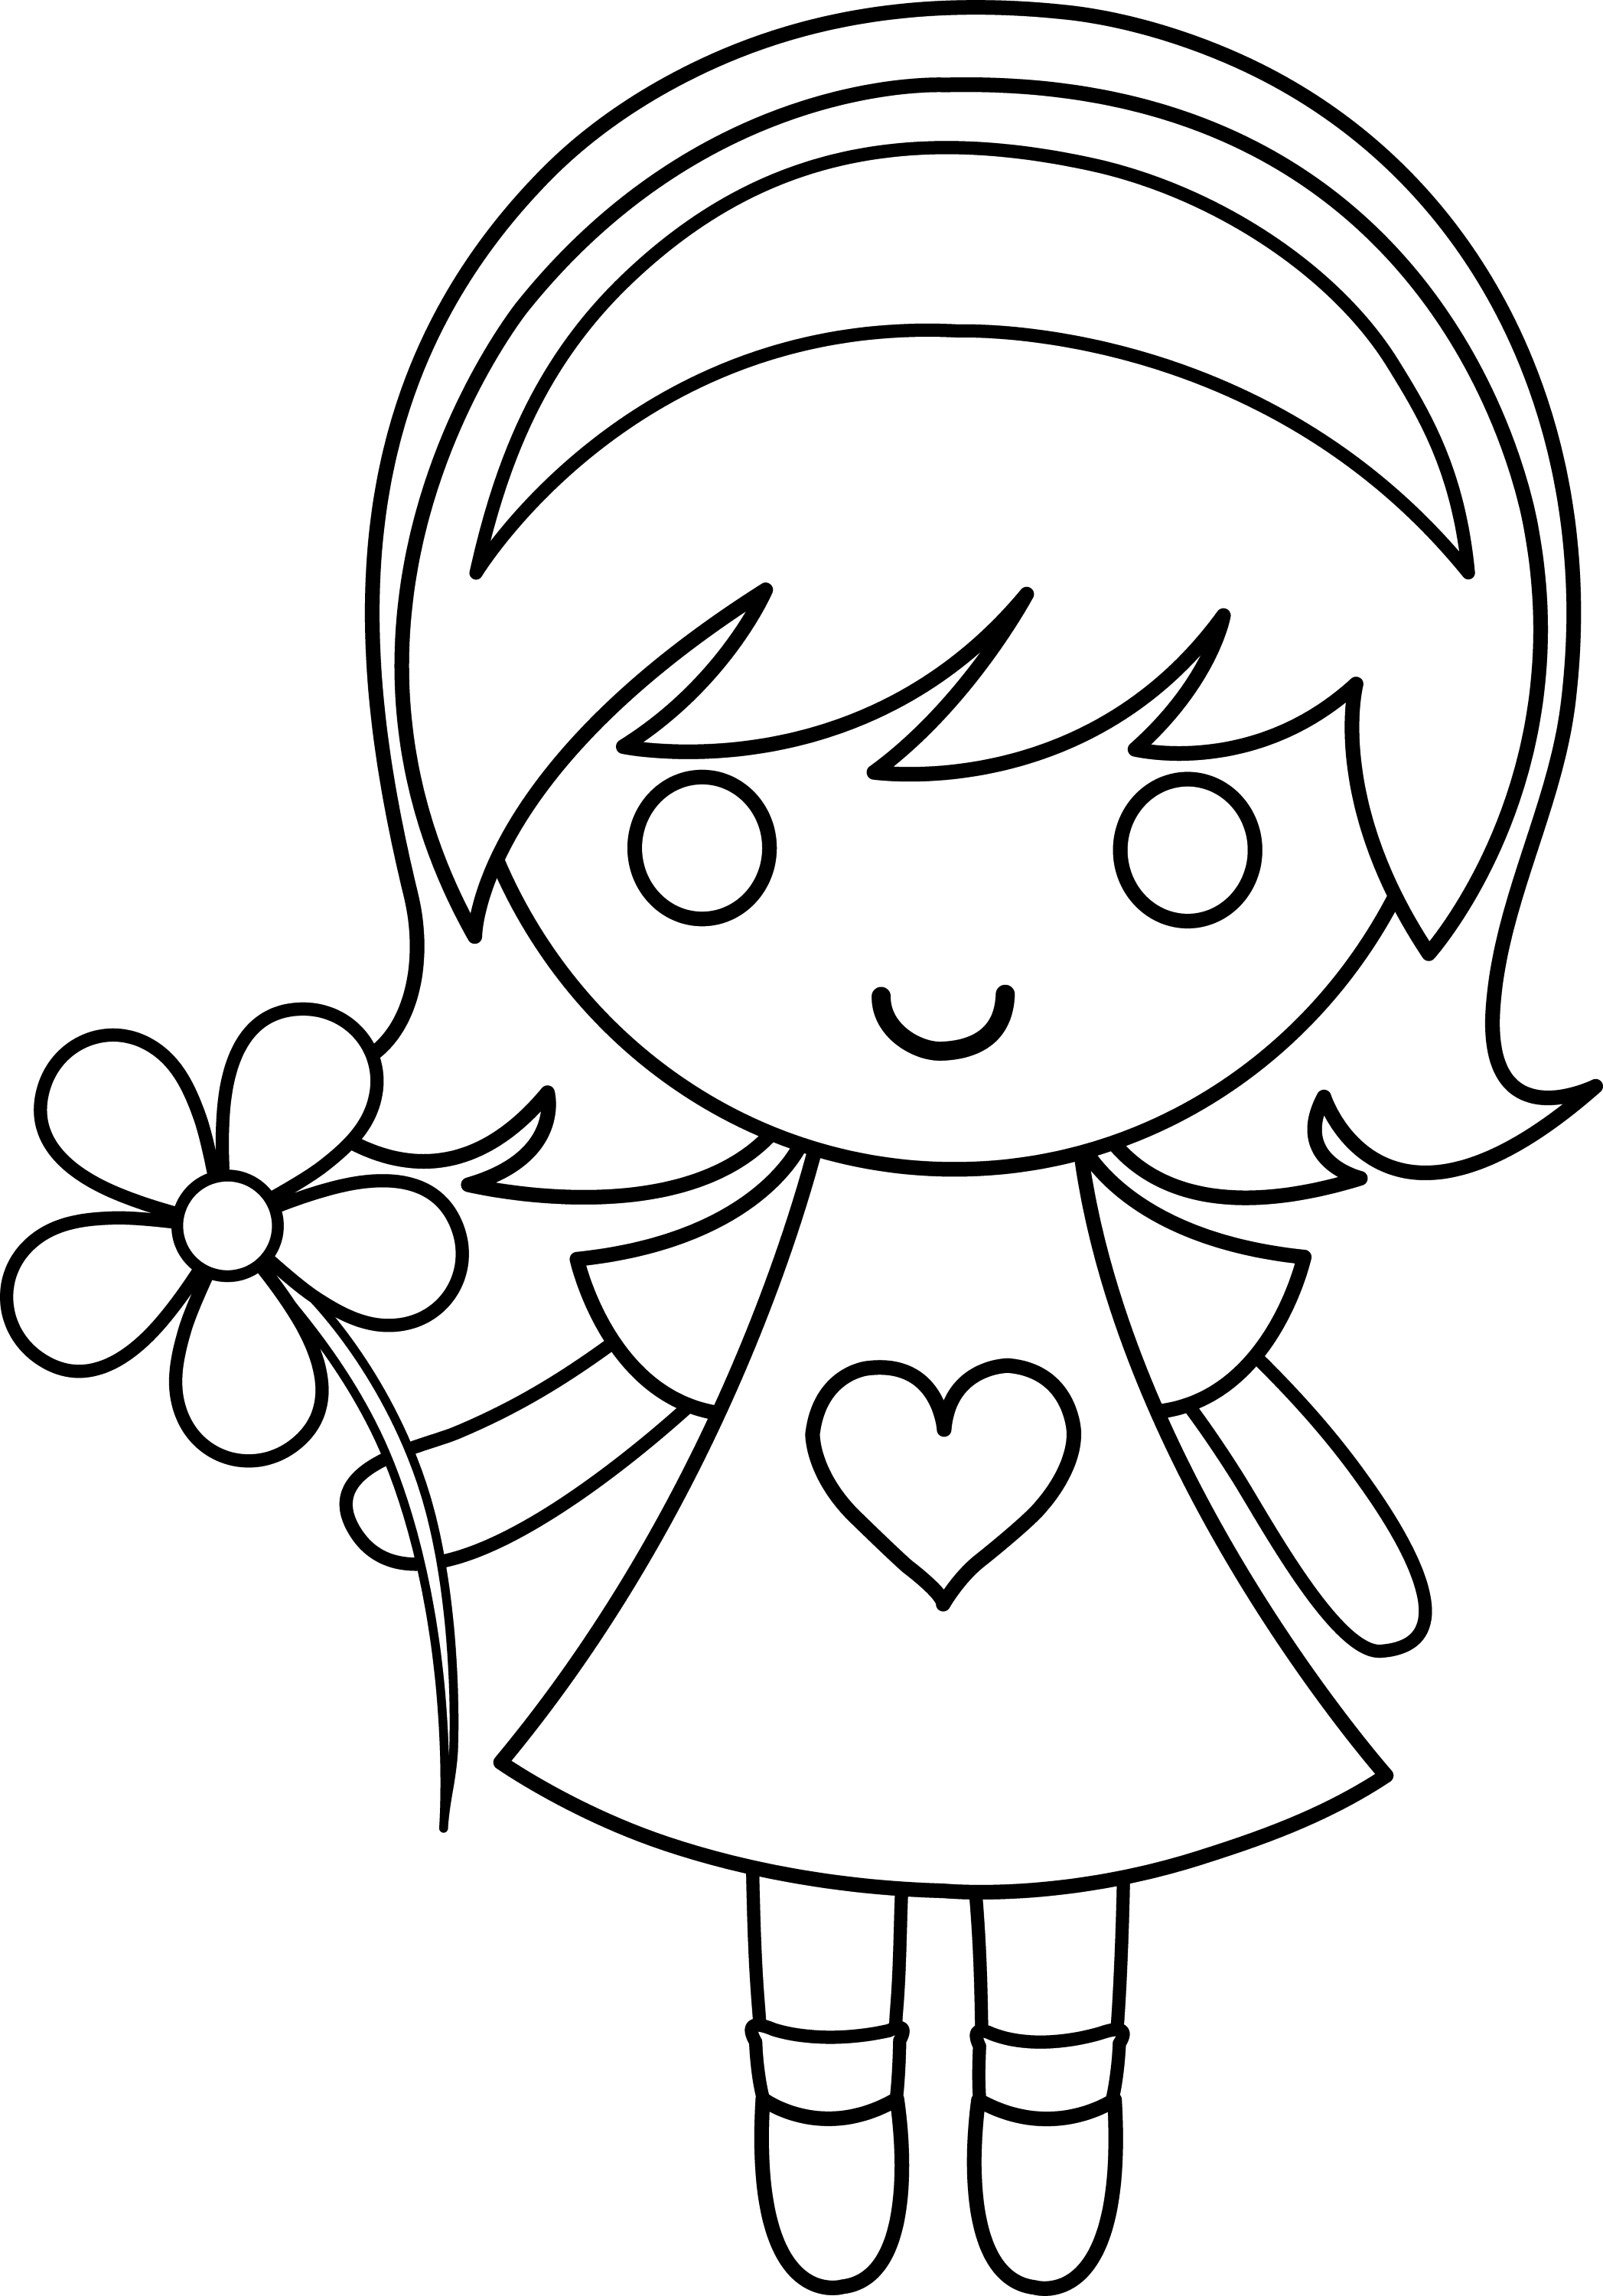 clipart line drawings free - photo #10